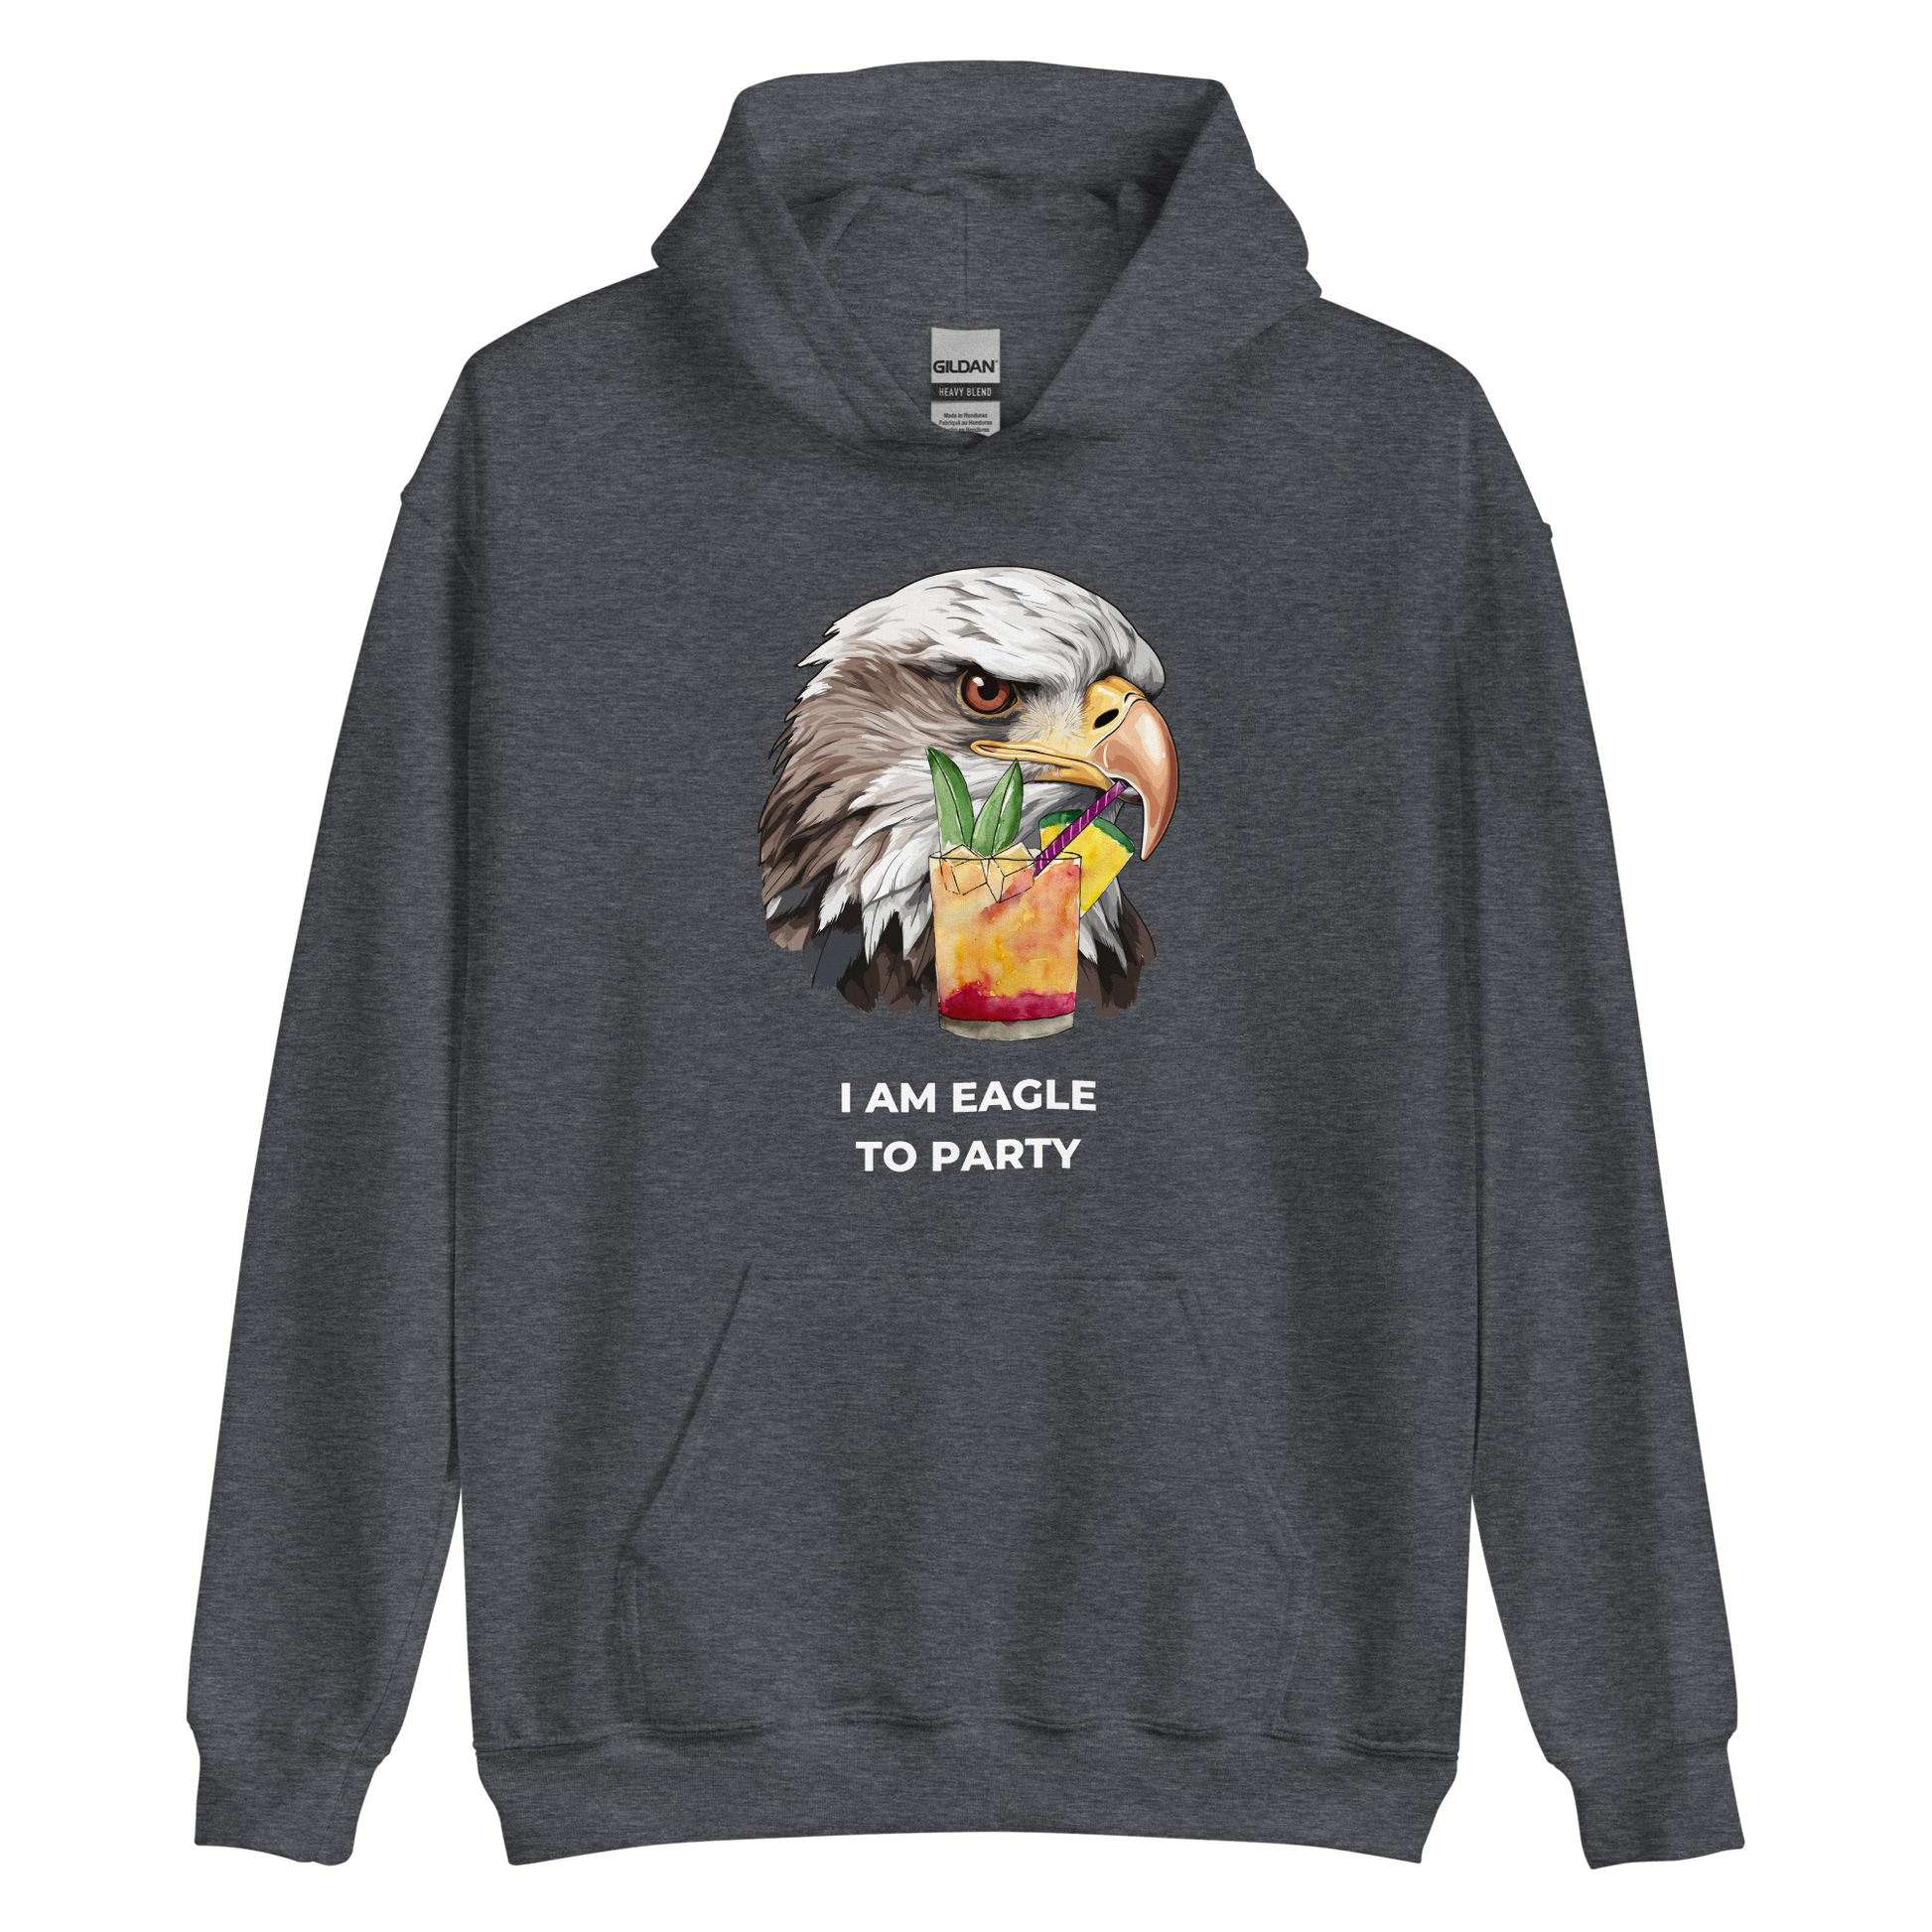 Dark Heather Eagle Hoodie featuring a captivating I Am Eagle To Party graphic on the chest - Funny Graphic Eagle Party Hoodies - Boozy Fox